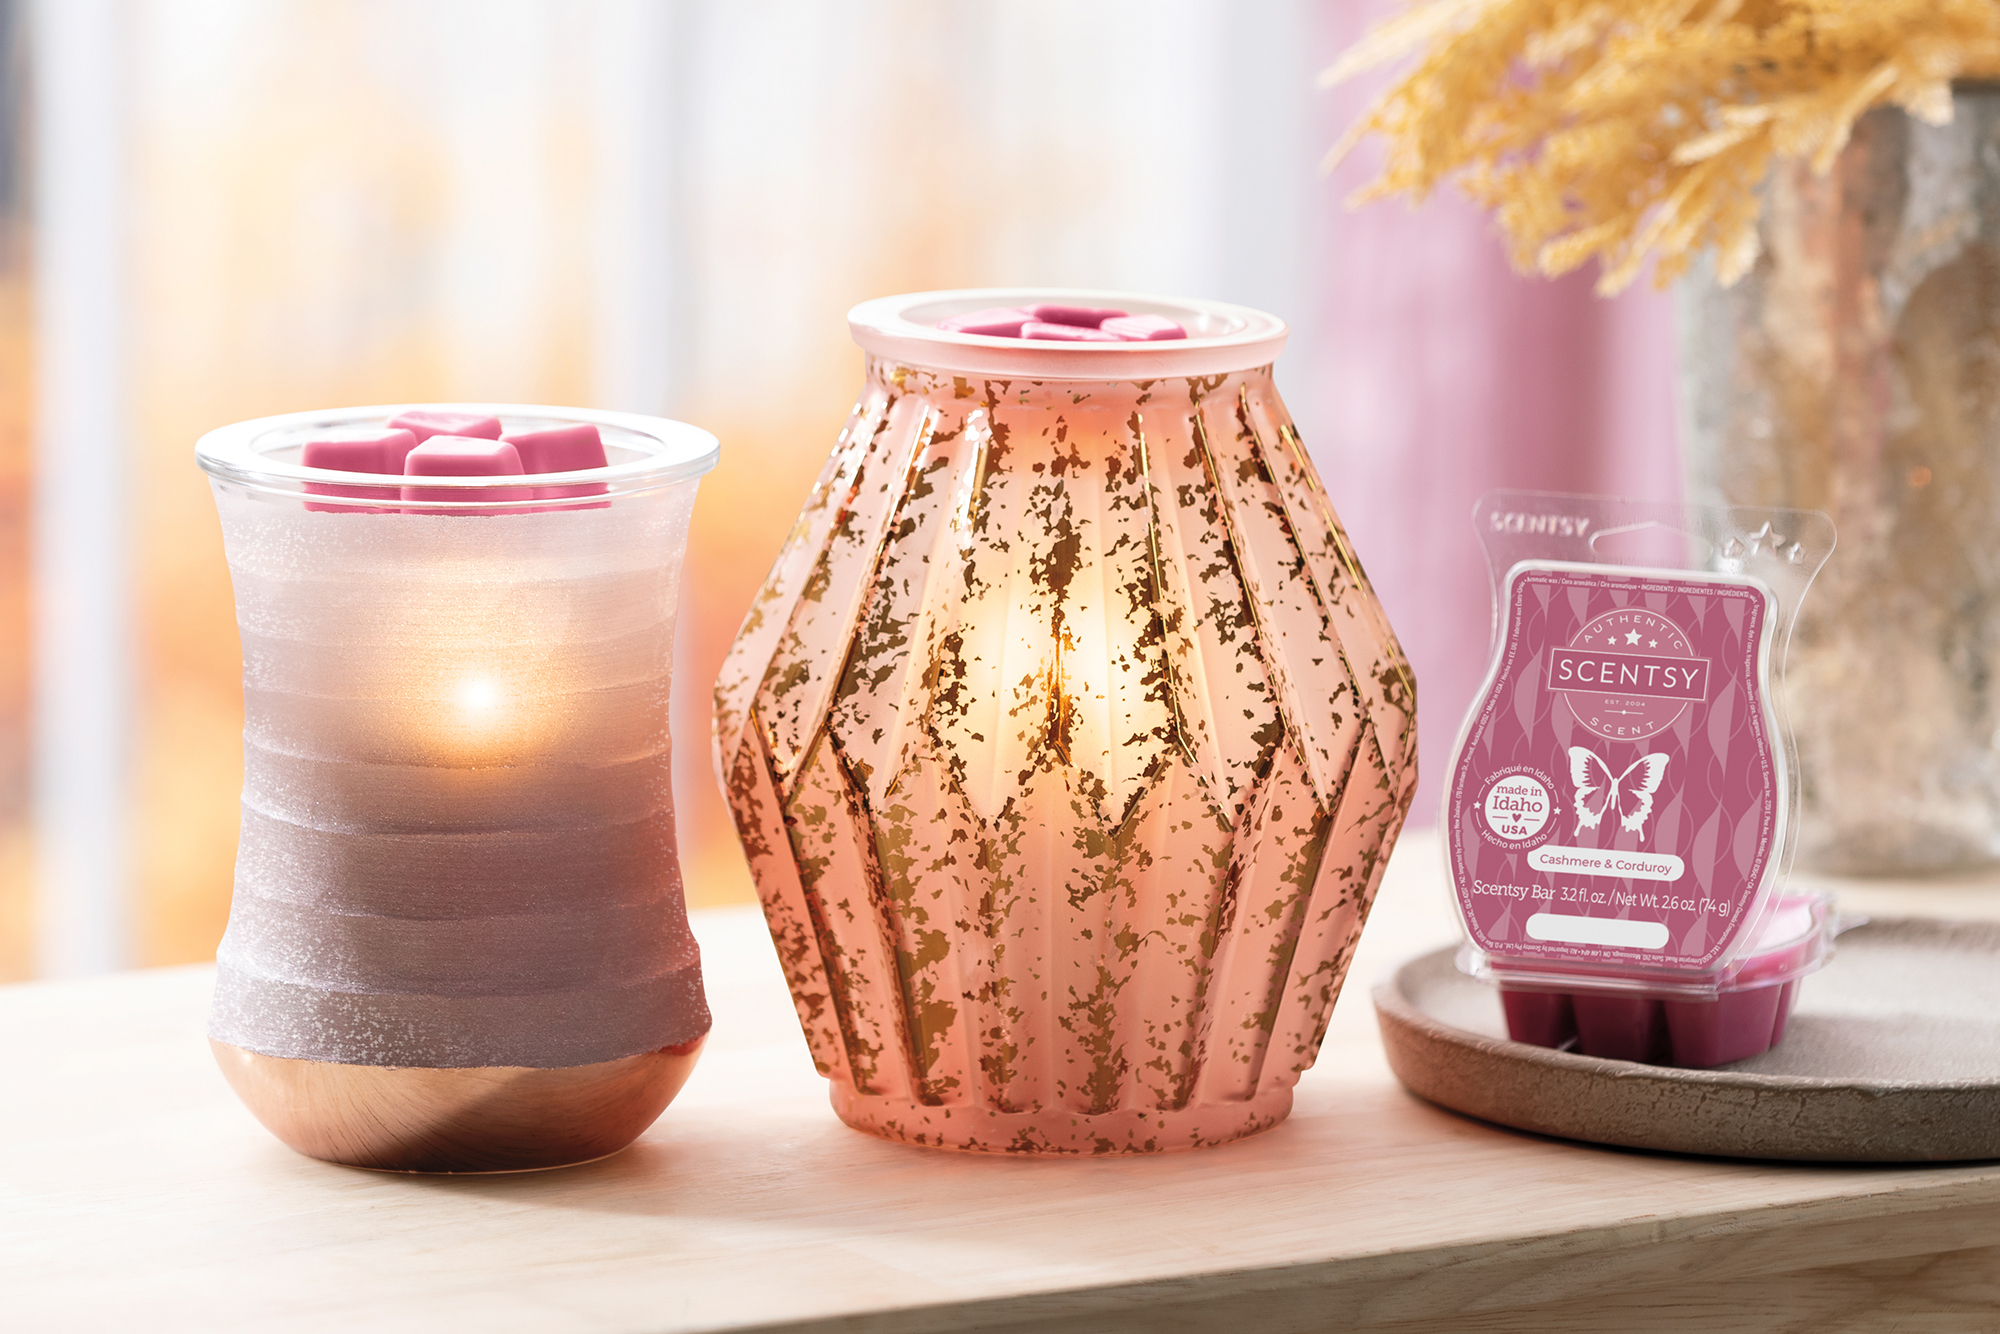 Are Scentsy products safe?